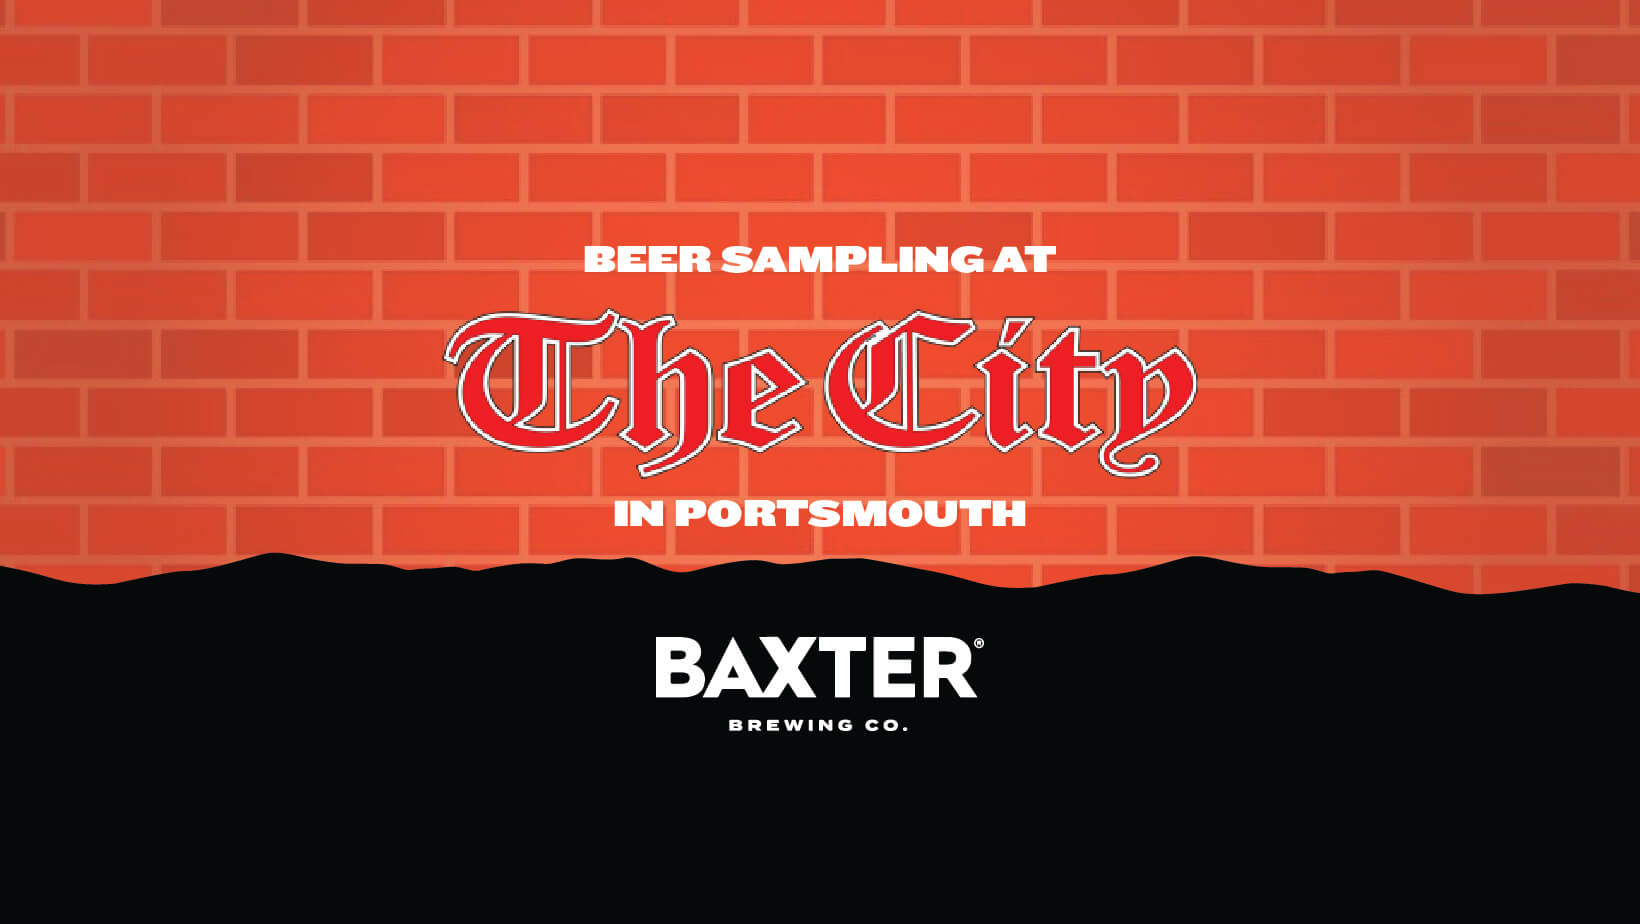 Image promoting a sampling event at The City in Portsmouth on May 25th